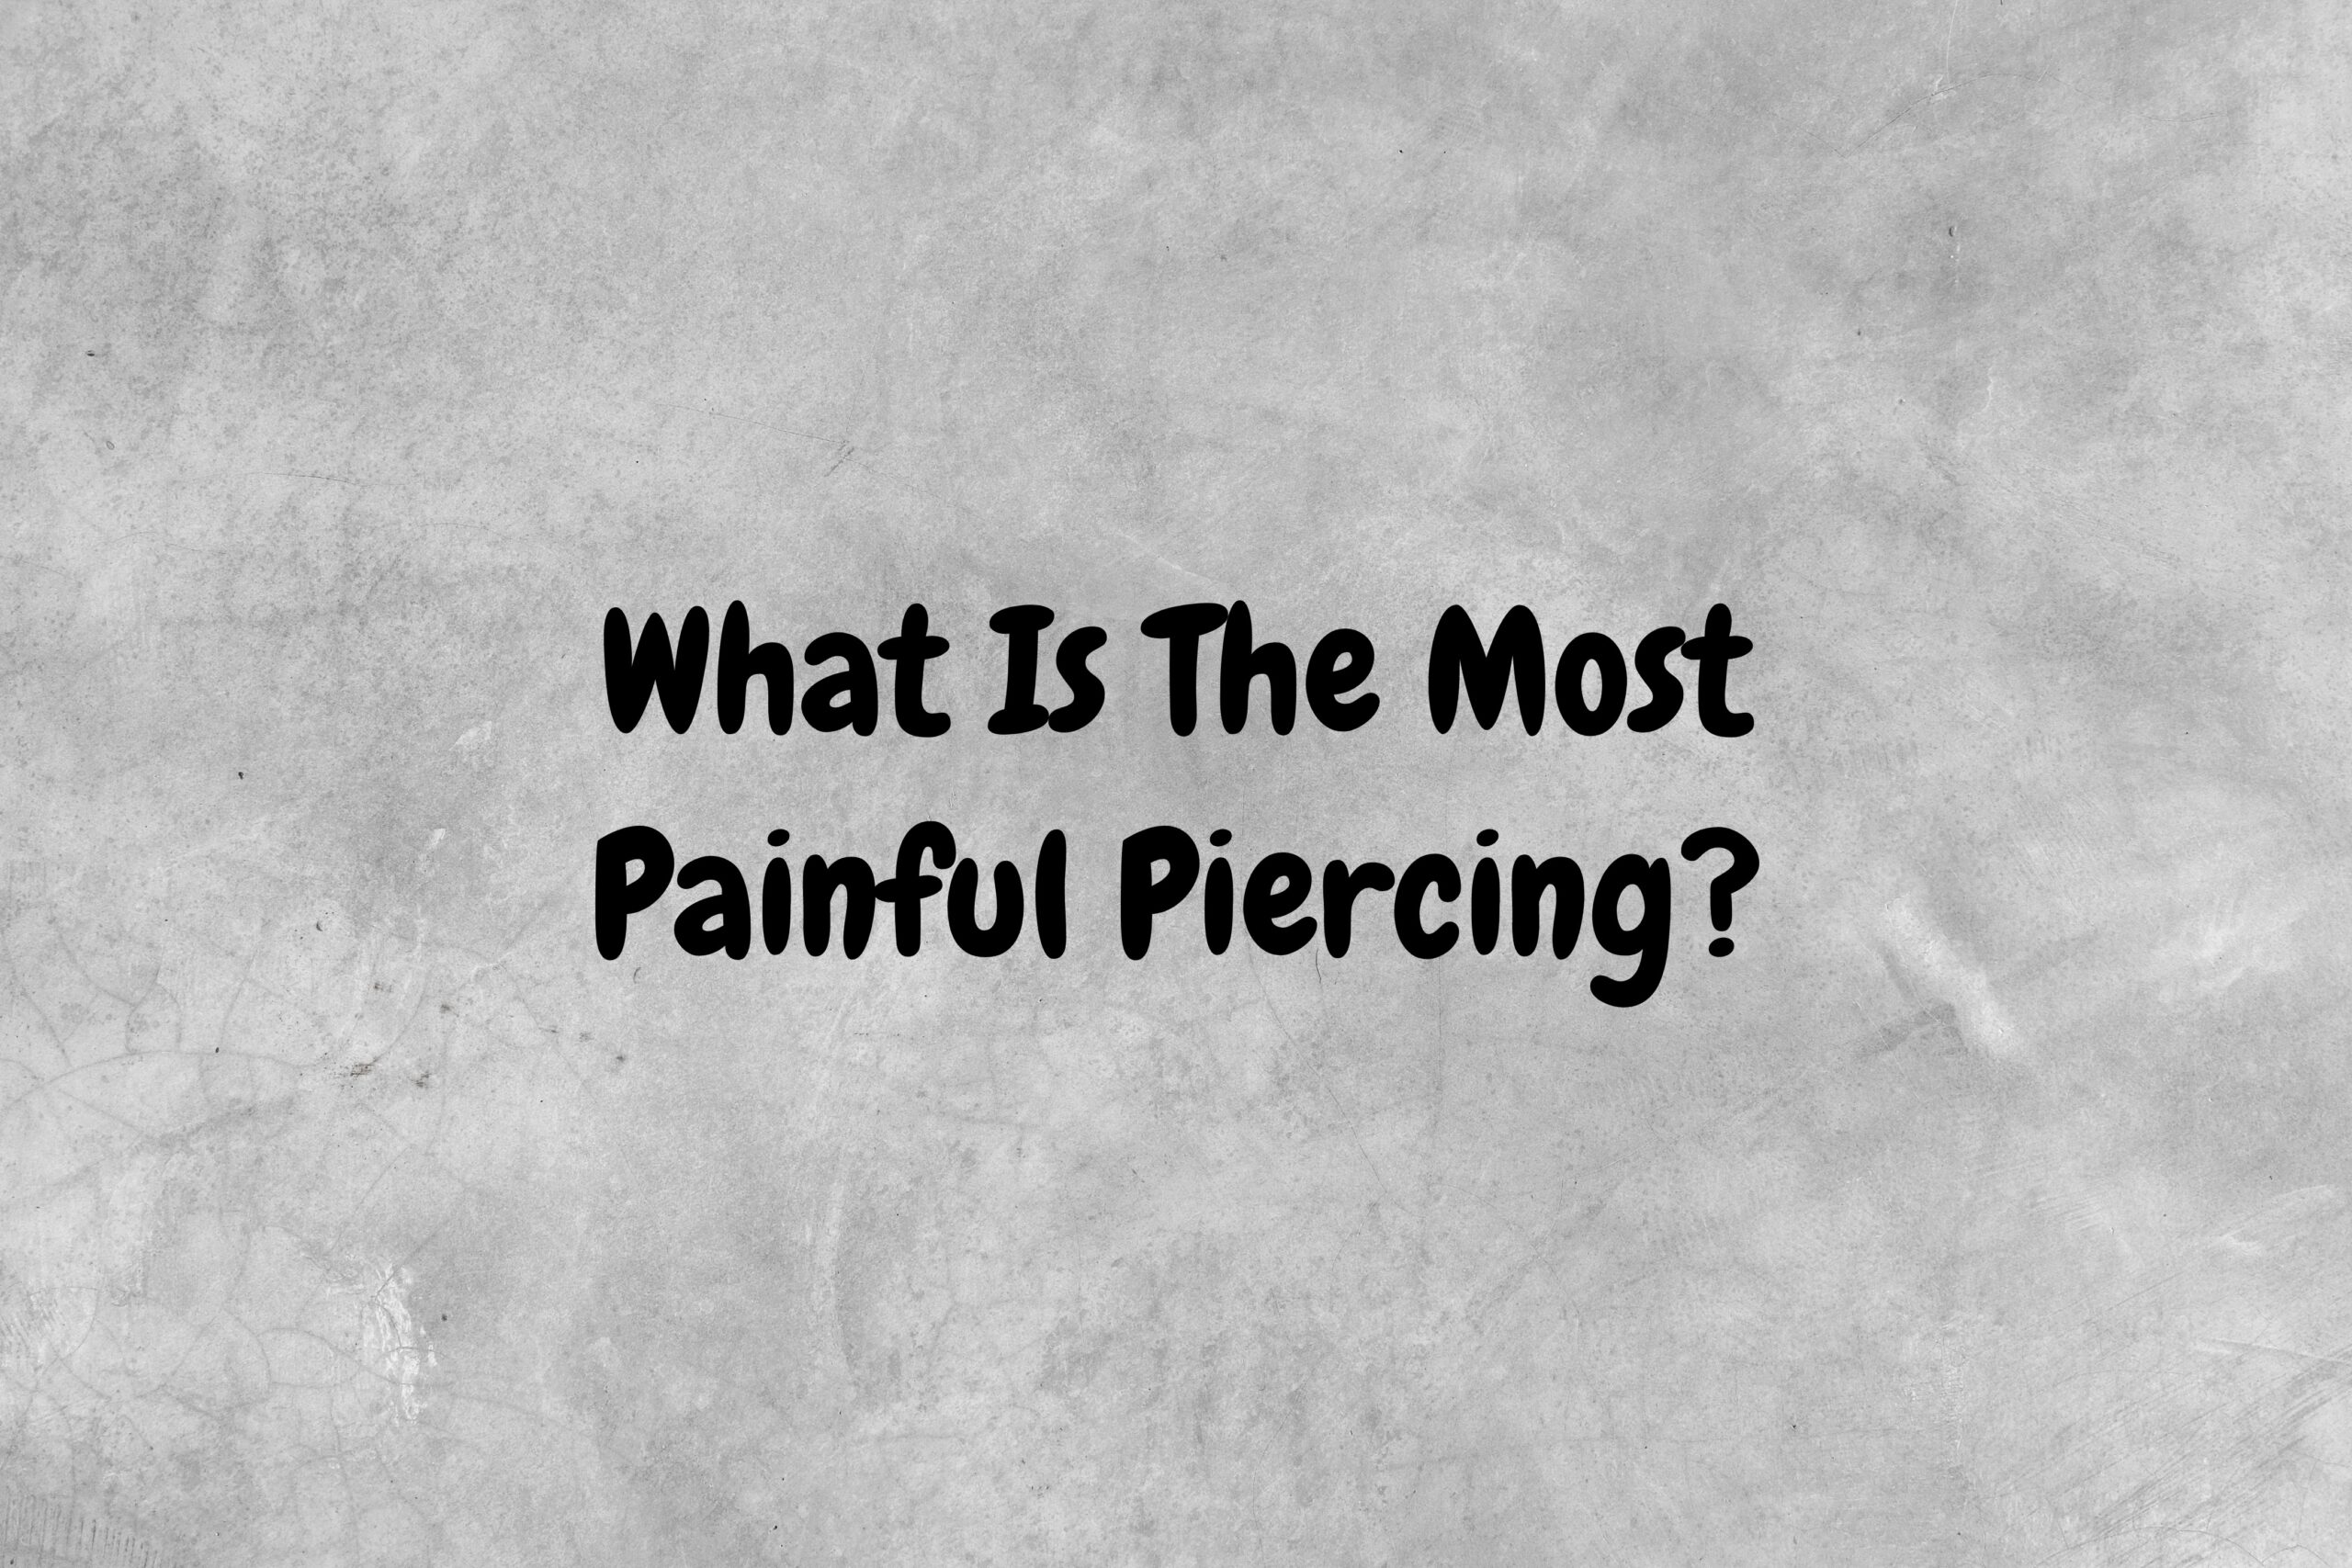 An image with a gray background and black text asking the question, "What is the most painful piercing?"